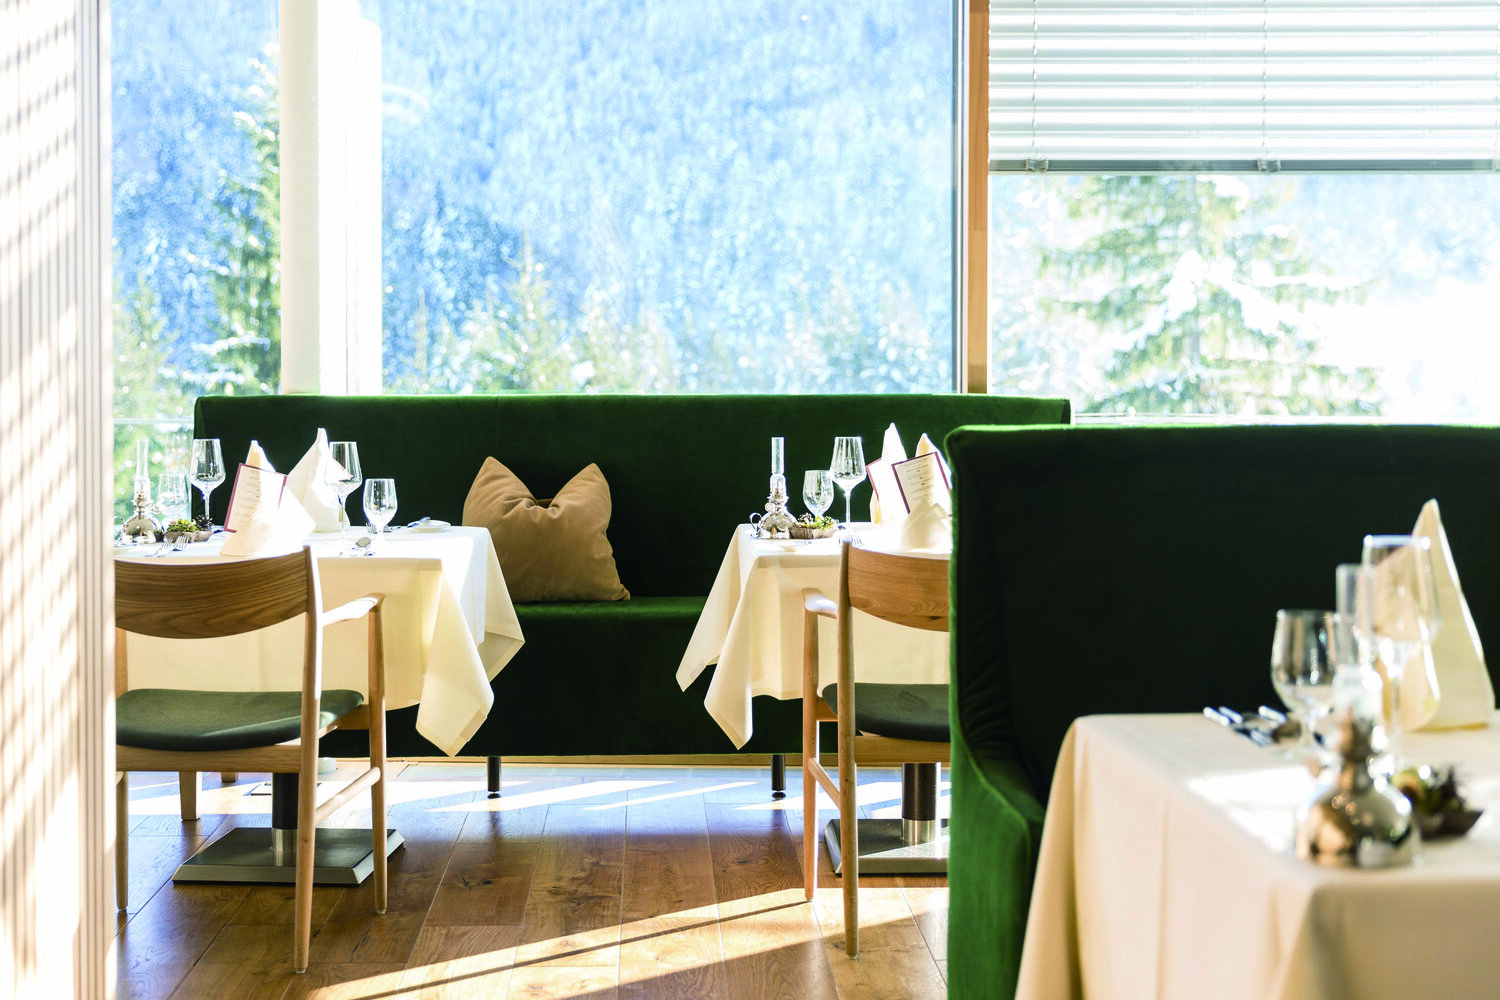 Modern restaurant dining room set for service with banquette seating in front of floor to ceiling glass overlooking the mountains.